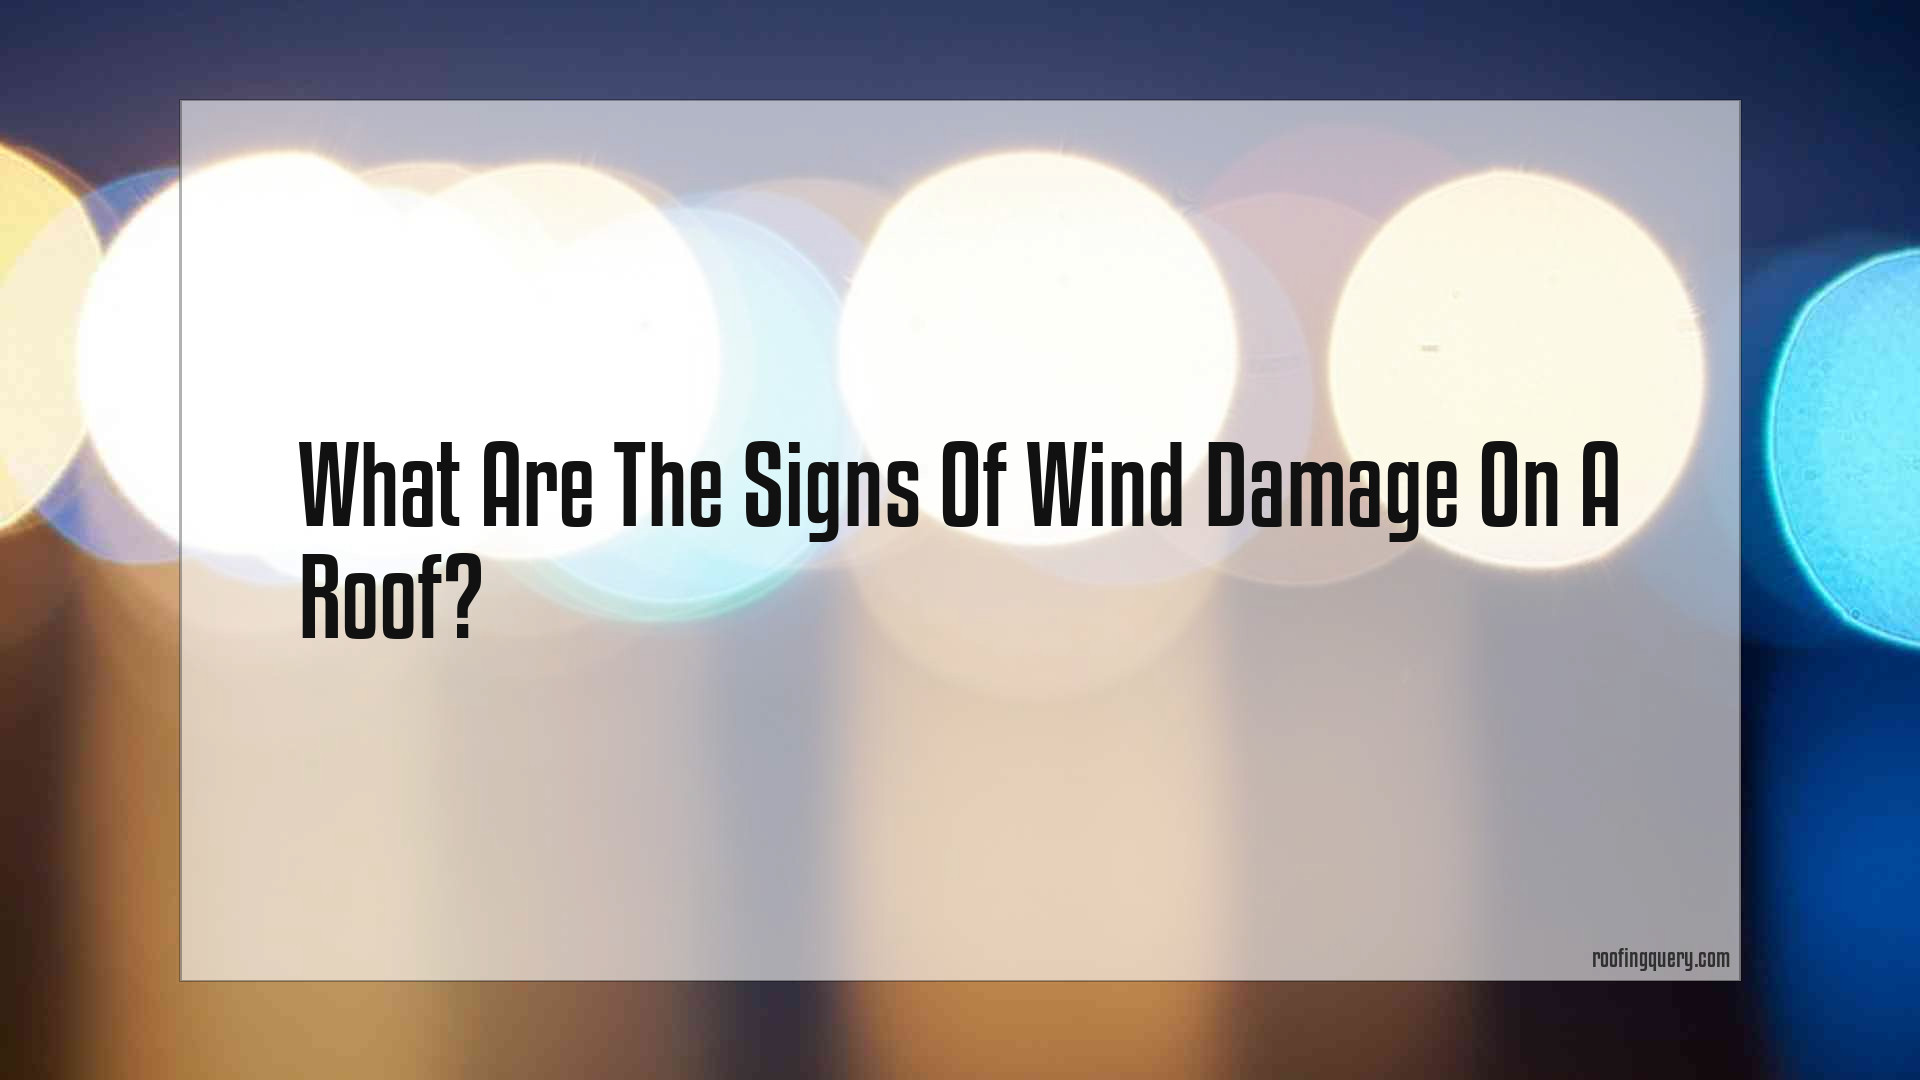 What Are The Signs Of Wind Damage On A Roof